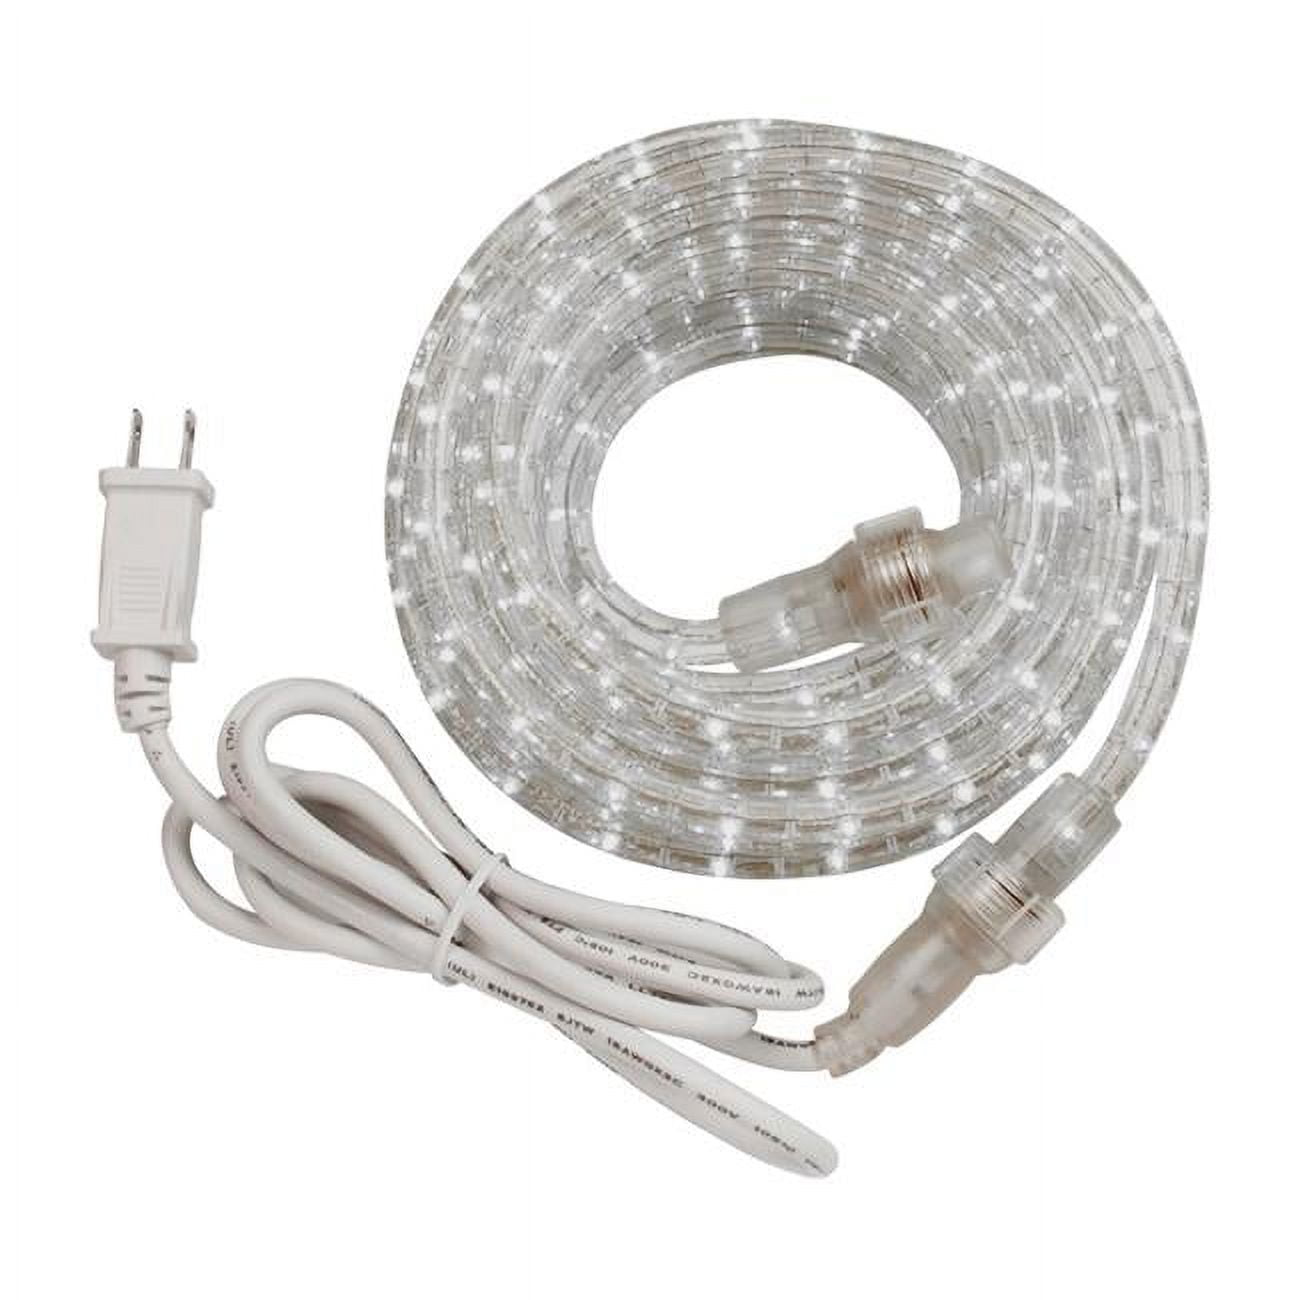 9783093 24 Ft. Decorative Clear Rope Light